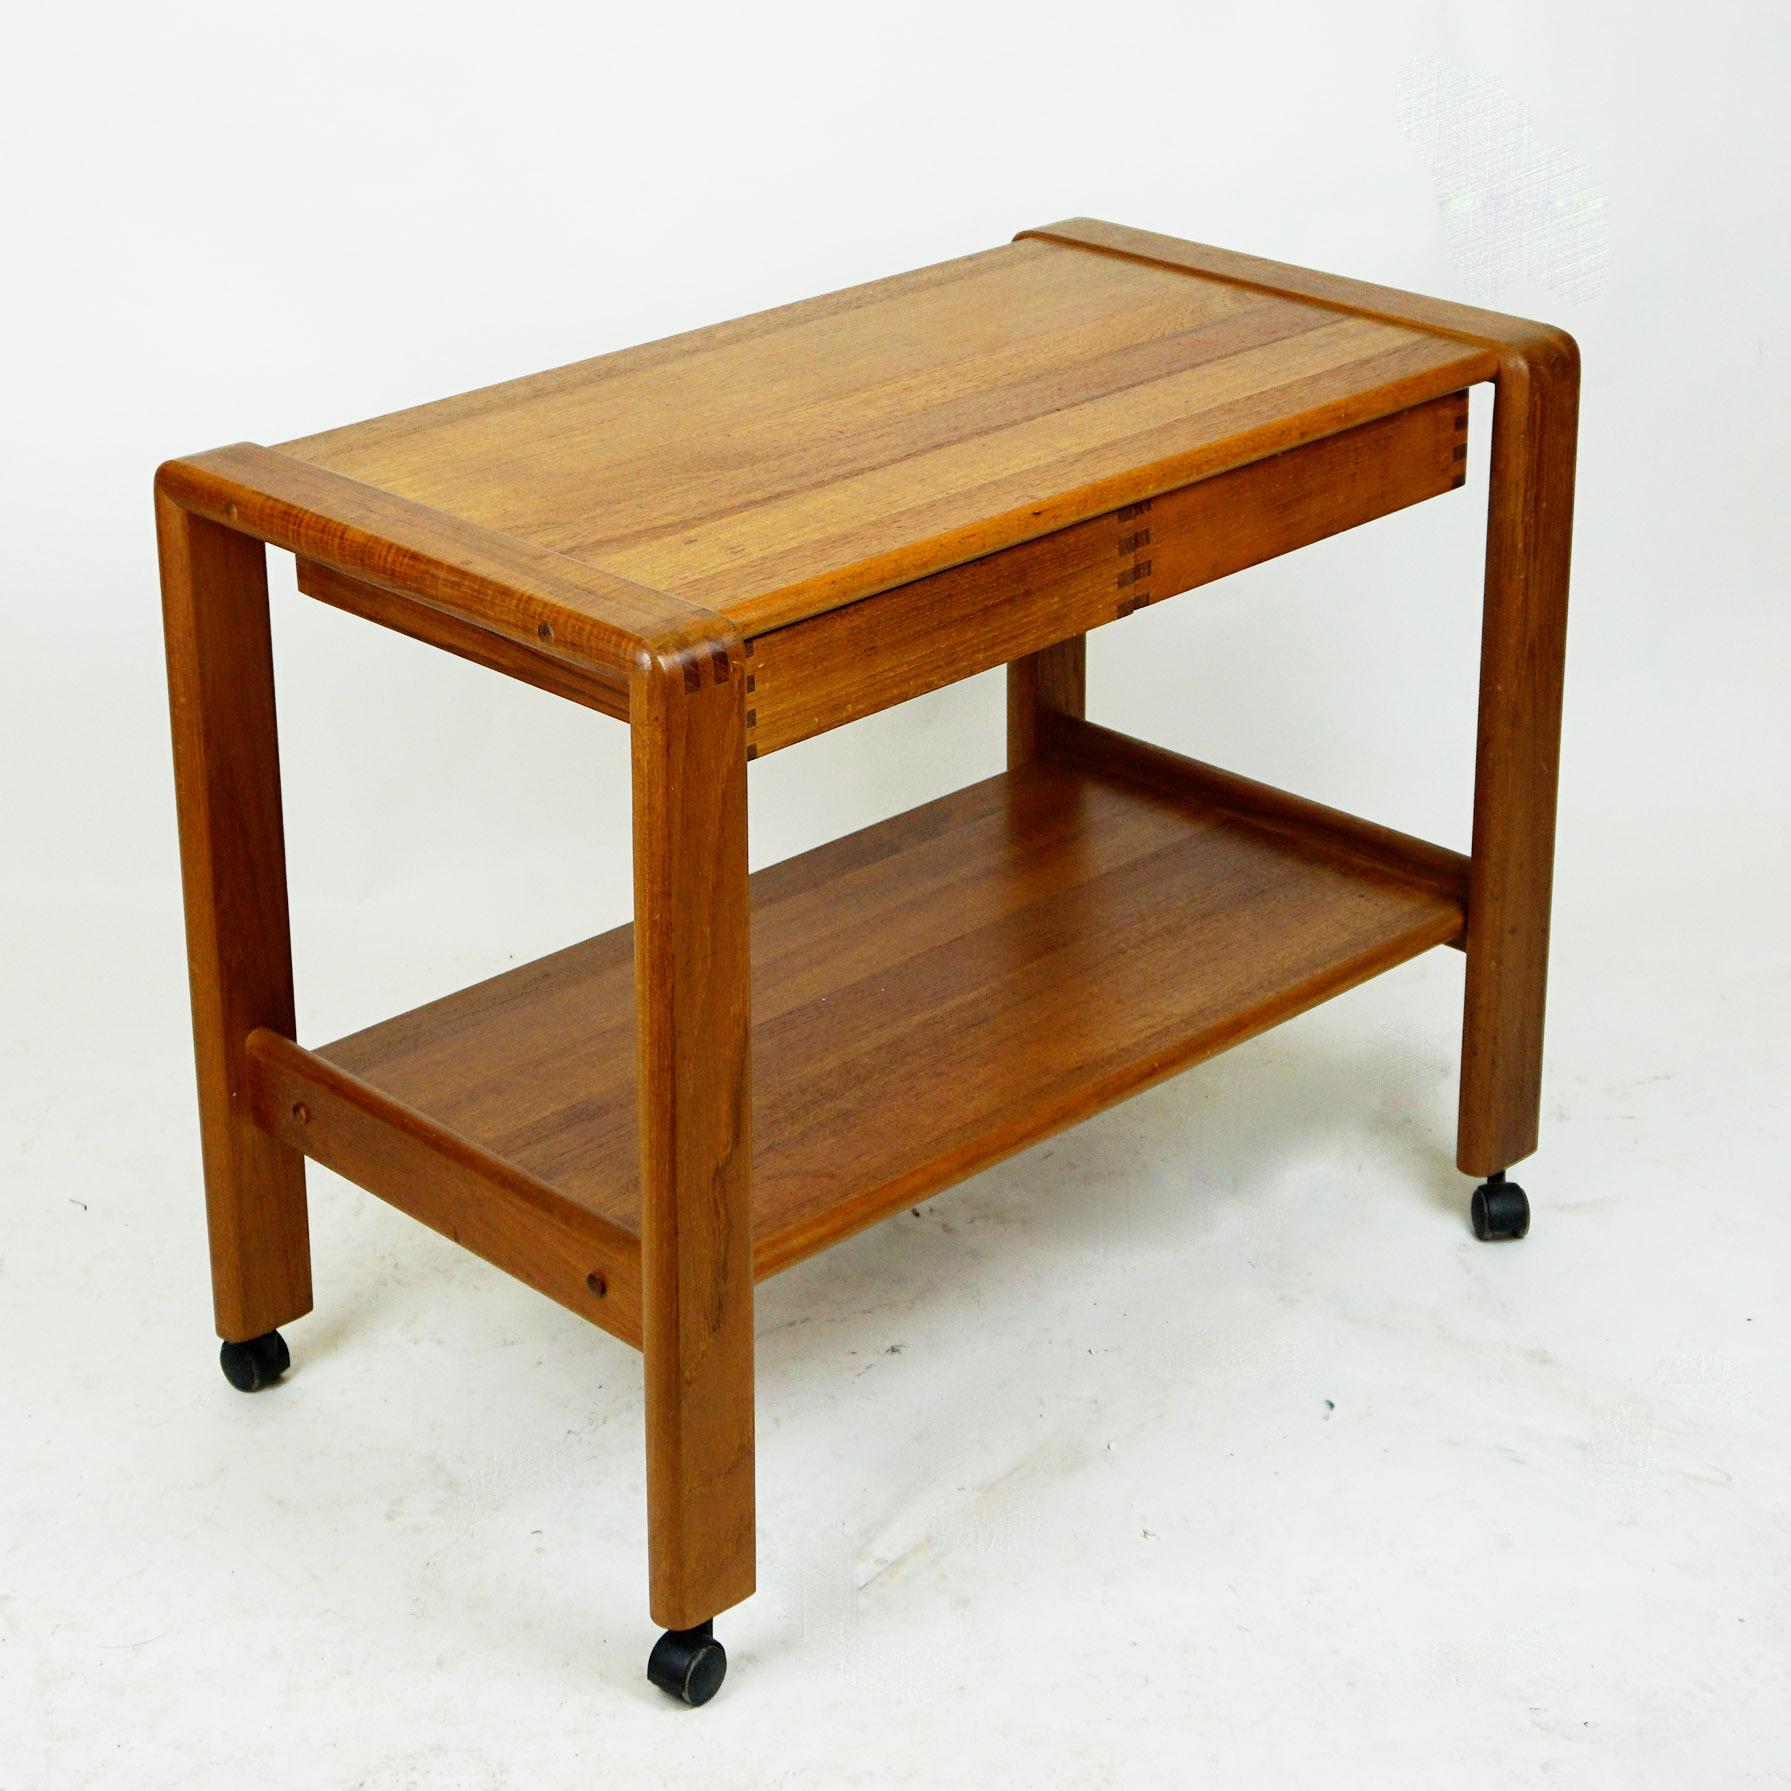 This charming Scandinavian Modern teak serving table or bar cart has been designed and produced in Denmark, 1960s.
It features beautiful handcrafted details, two trays and two drawers under its top. It is in beautiful original vintage condition and